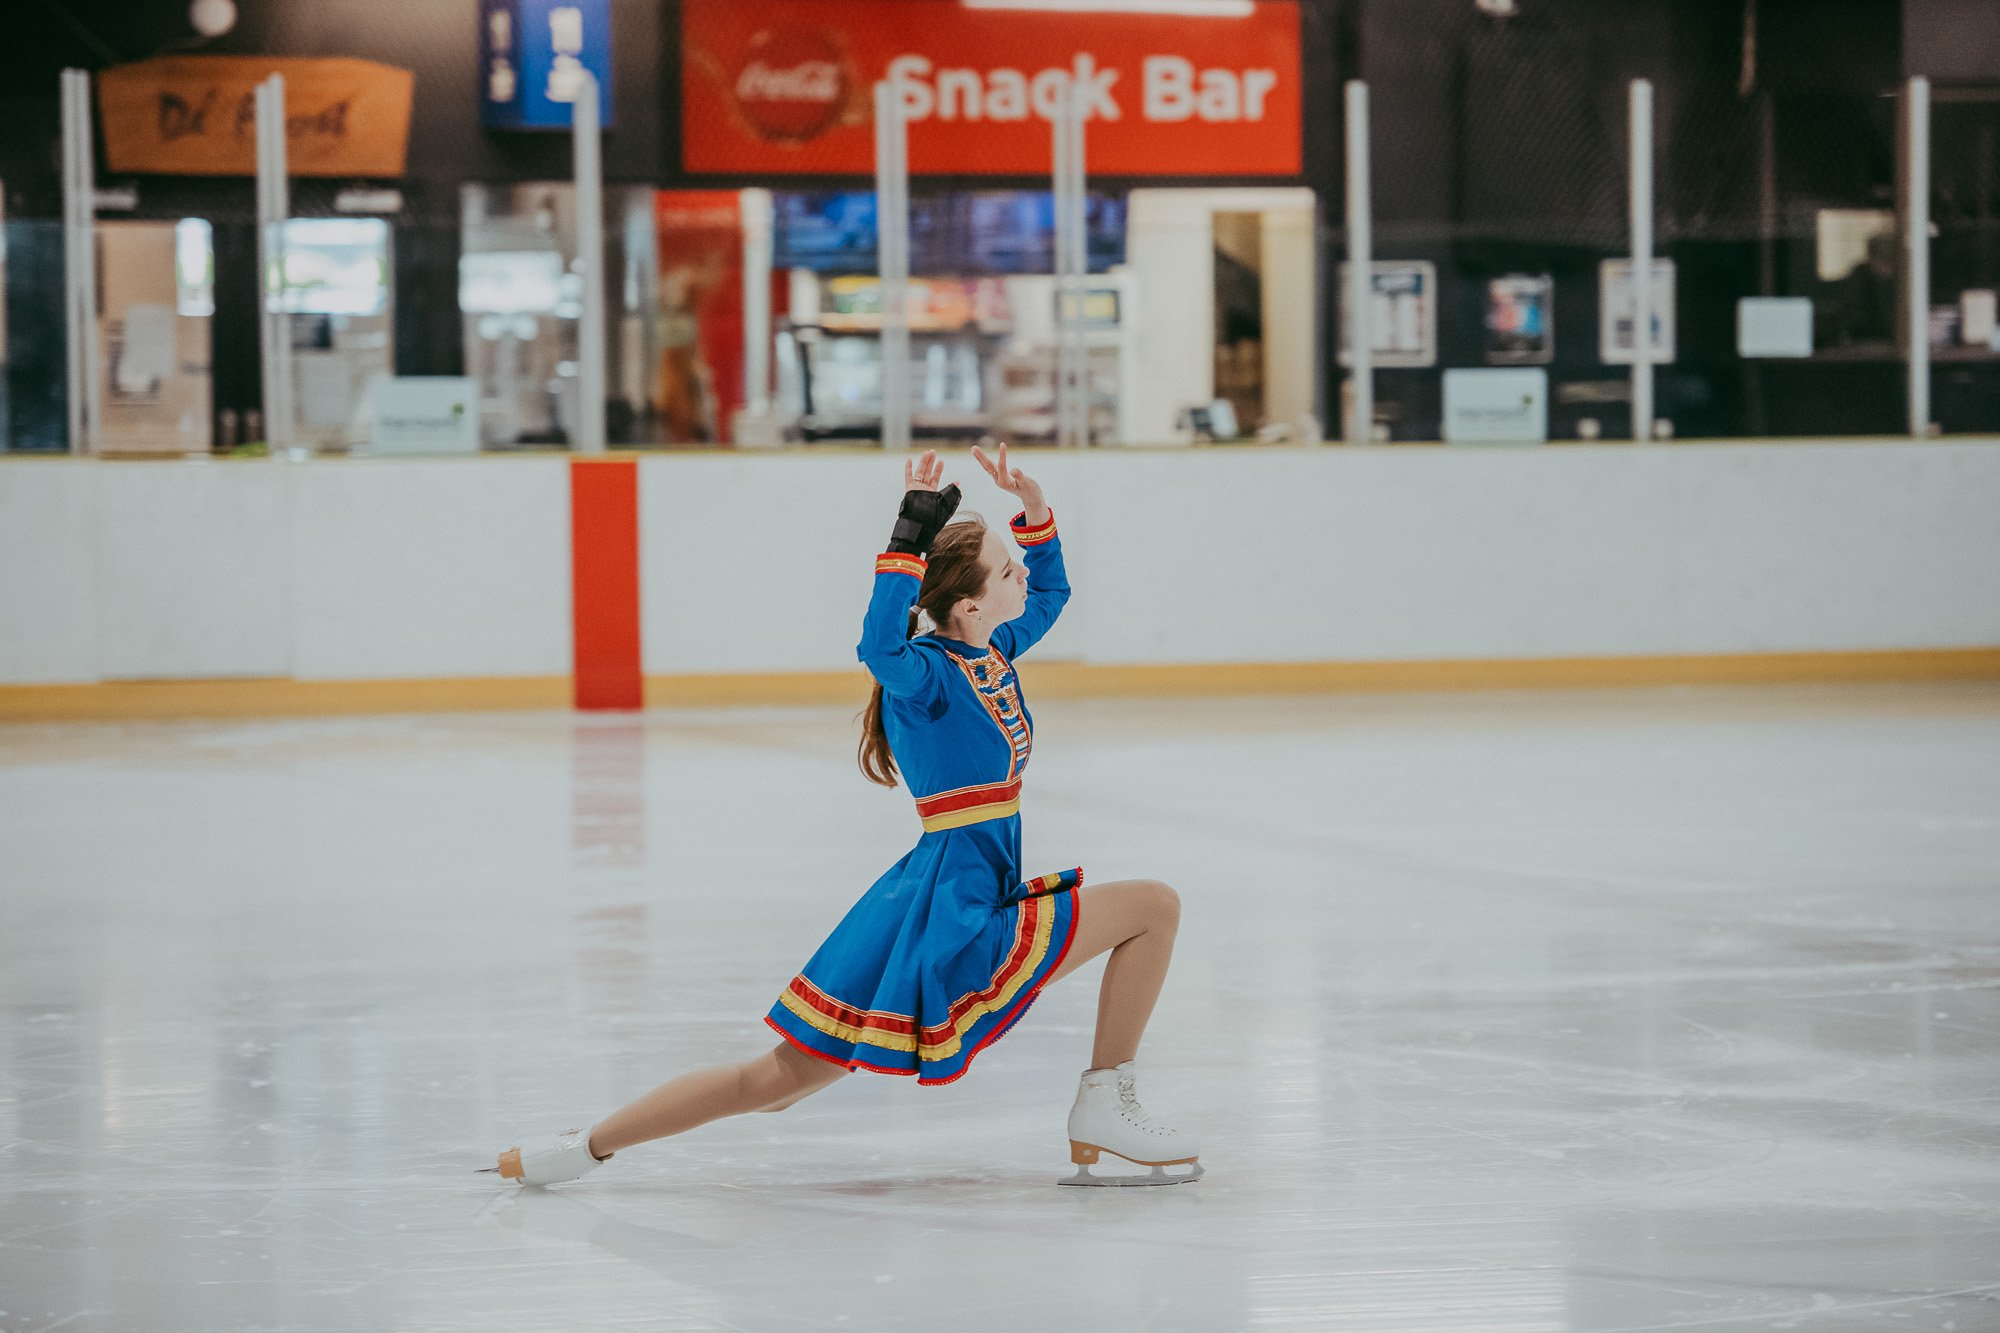 Nationals-ice skating_by_Levien-1.jpg